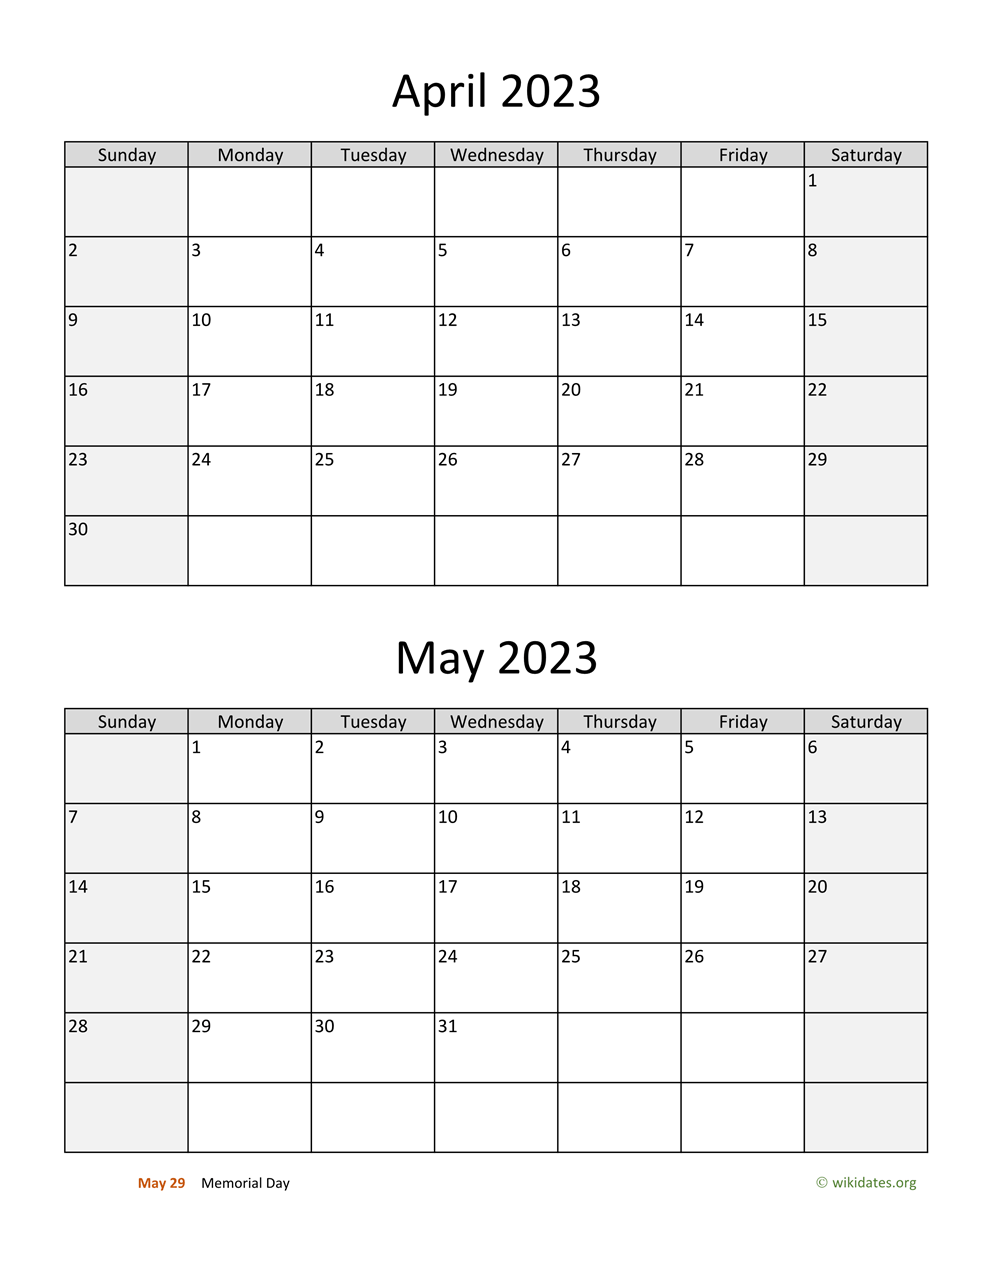 April and May 2023 Calendar | WikiDates.org